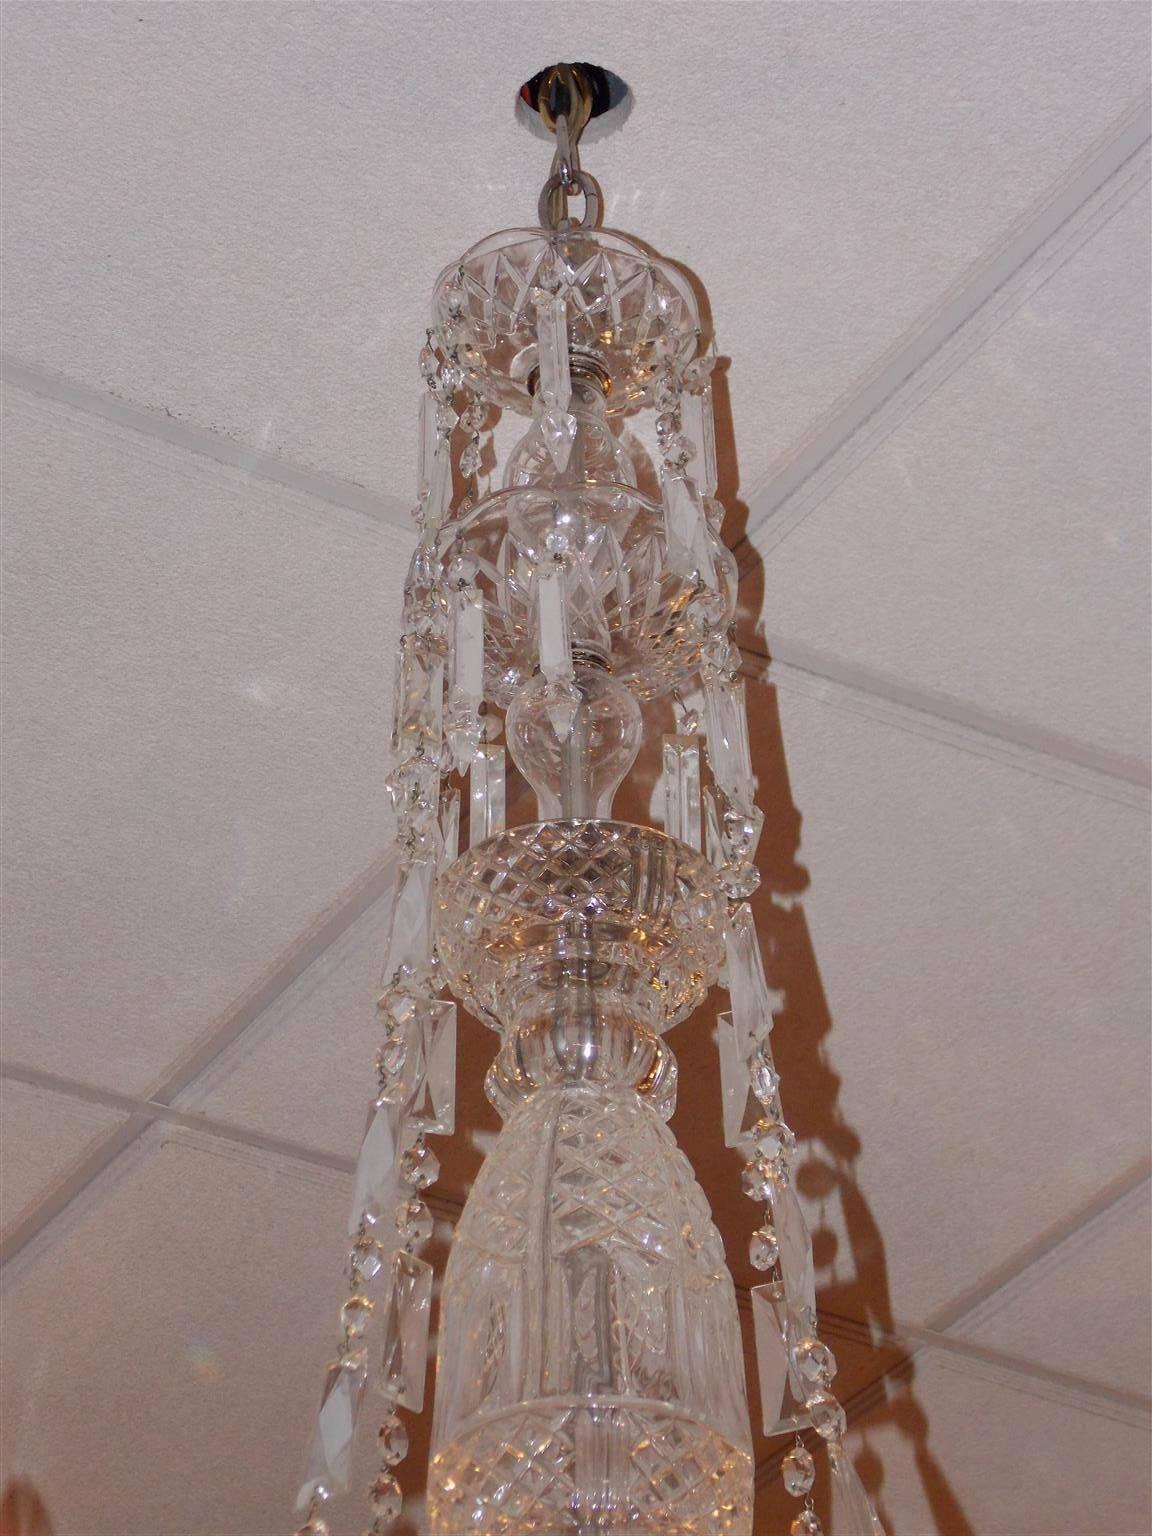 English cut crystal chandelier with a centred bulbous crystal column, four scrolled spiral arms, cascading connecting prisms, and terminating with a large cut crystal bowl and faceted ball finial. Late 19th century. Chandelier was originally candle